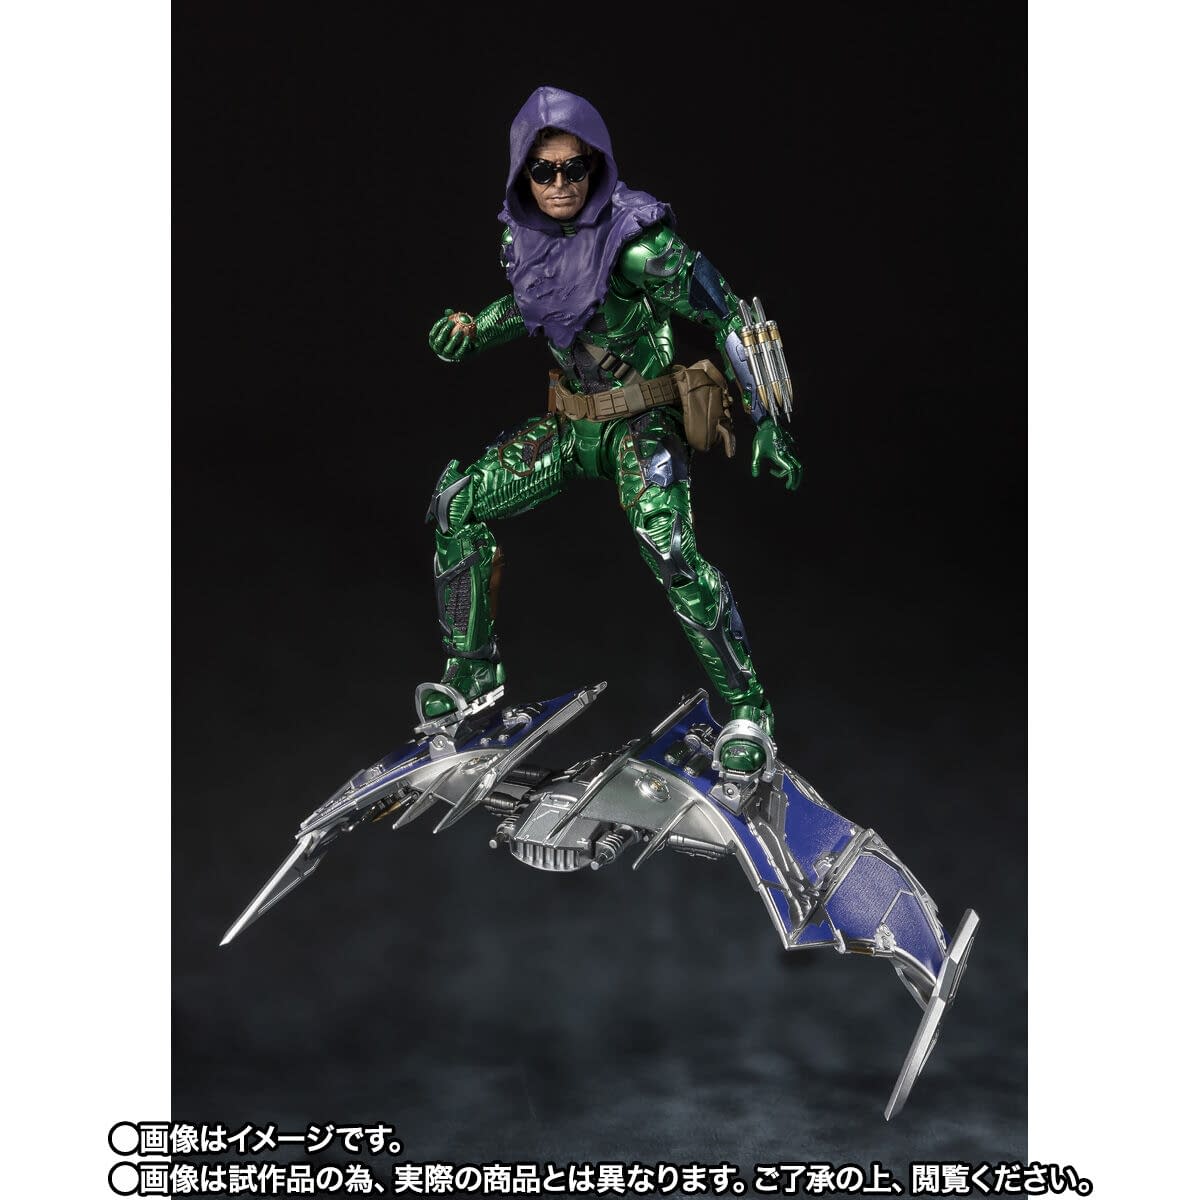 Spider-Man: No Way Home Green Goblin Coming Soon to S.H.Figuarts